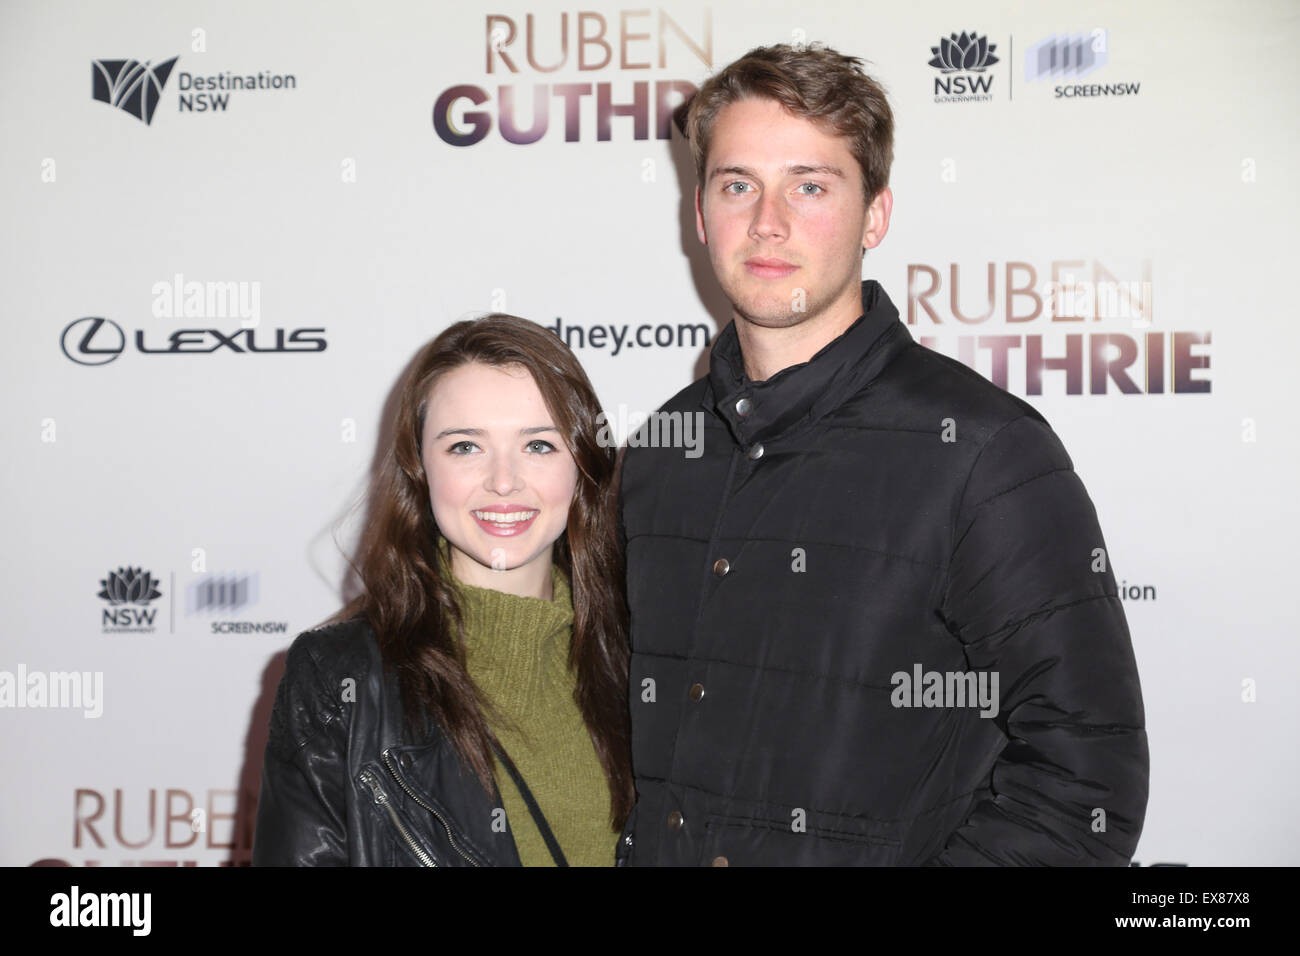 Sydney, Australia. 9 July 2015. Actress Philippa Northeast (Home & Away) and Isaac Brown arrive on the red carpet at The Ritz, 45 St Paul’s Street, Randwick for the gala screening of the film ‘Ruben Guthrie’. Credit: Credit:  Richard Milnes/Alamy Live News Stock Photo